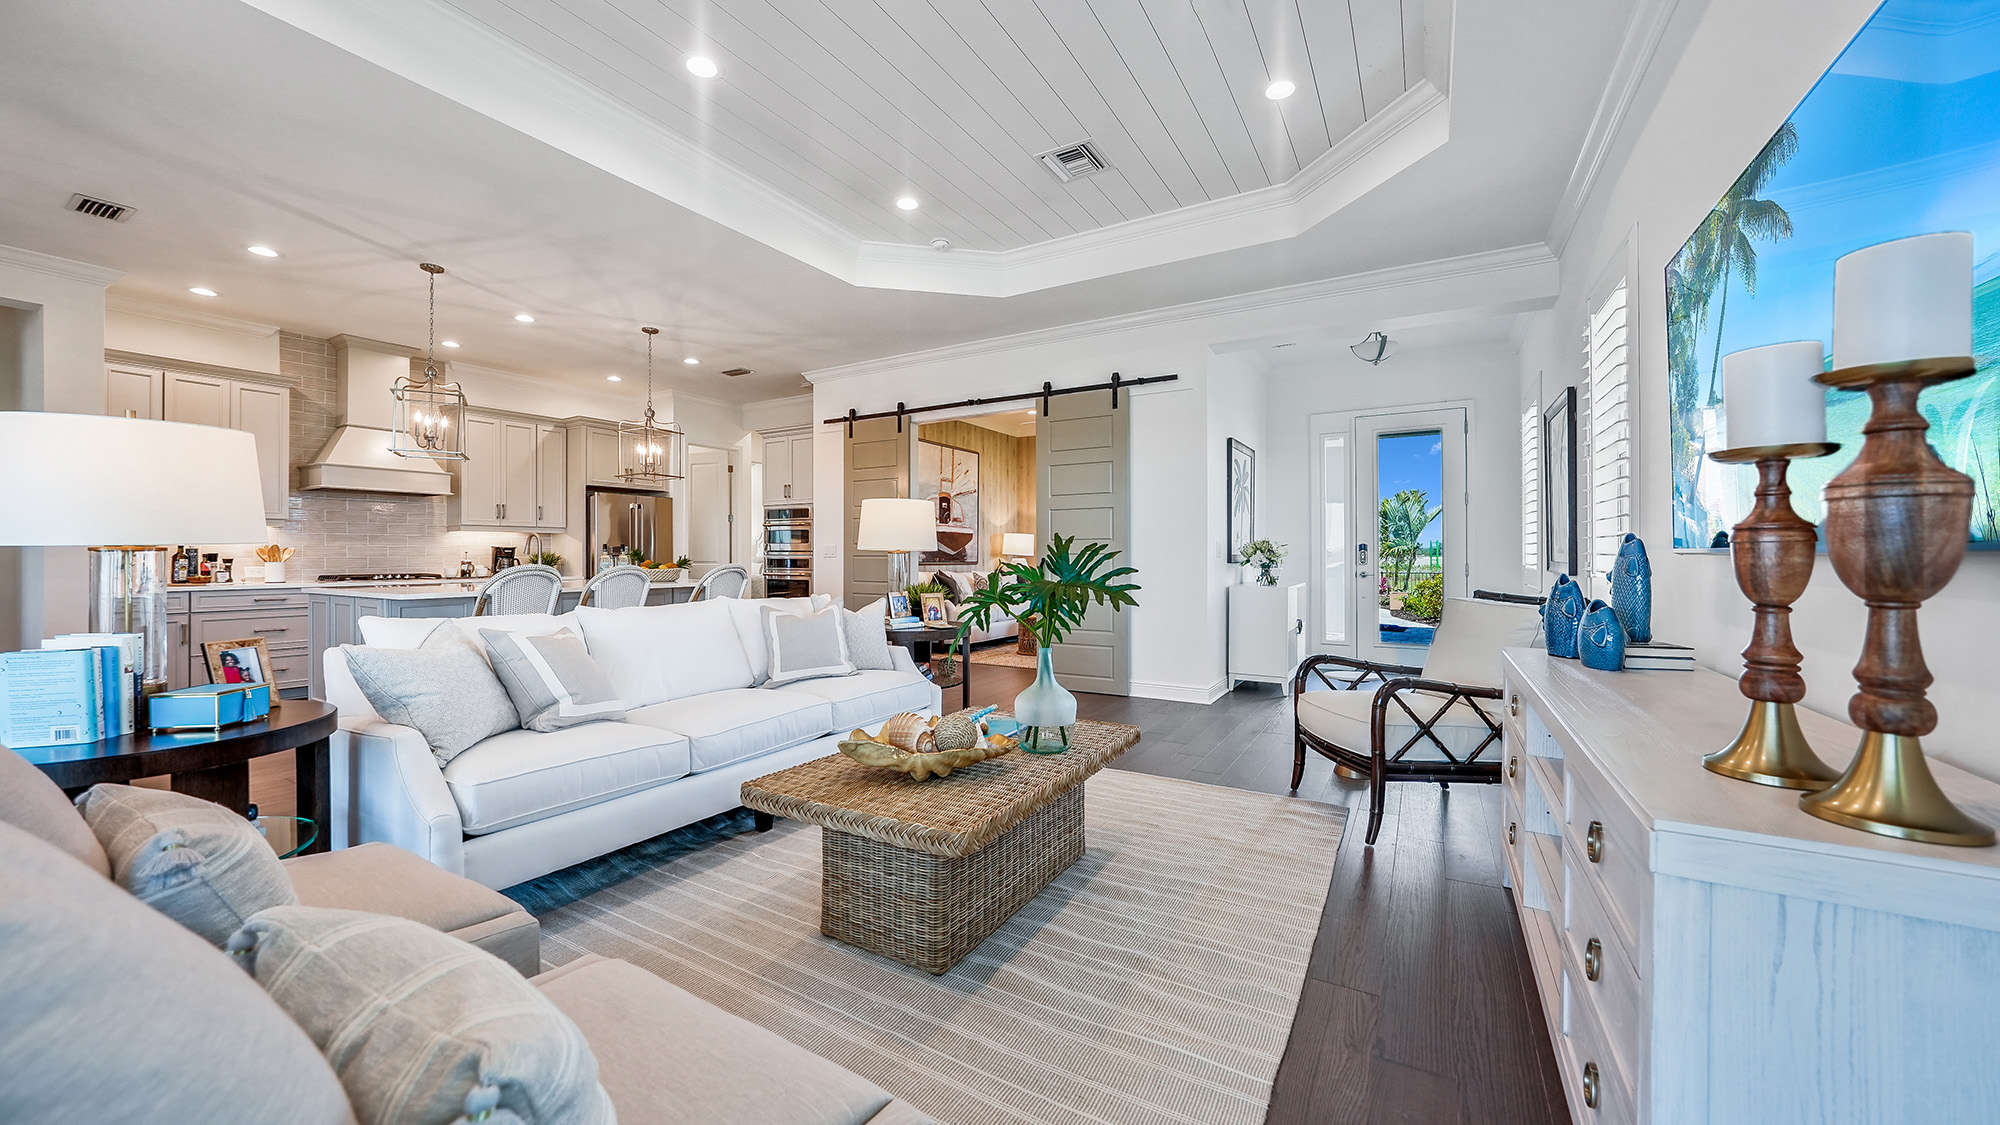 Living room, kitchen, and dining area at Sky Sail Bright Meadow by Neal Communities